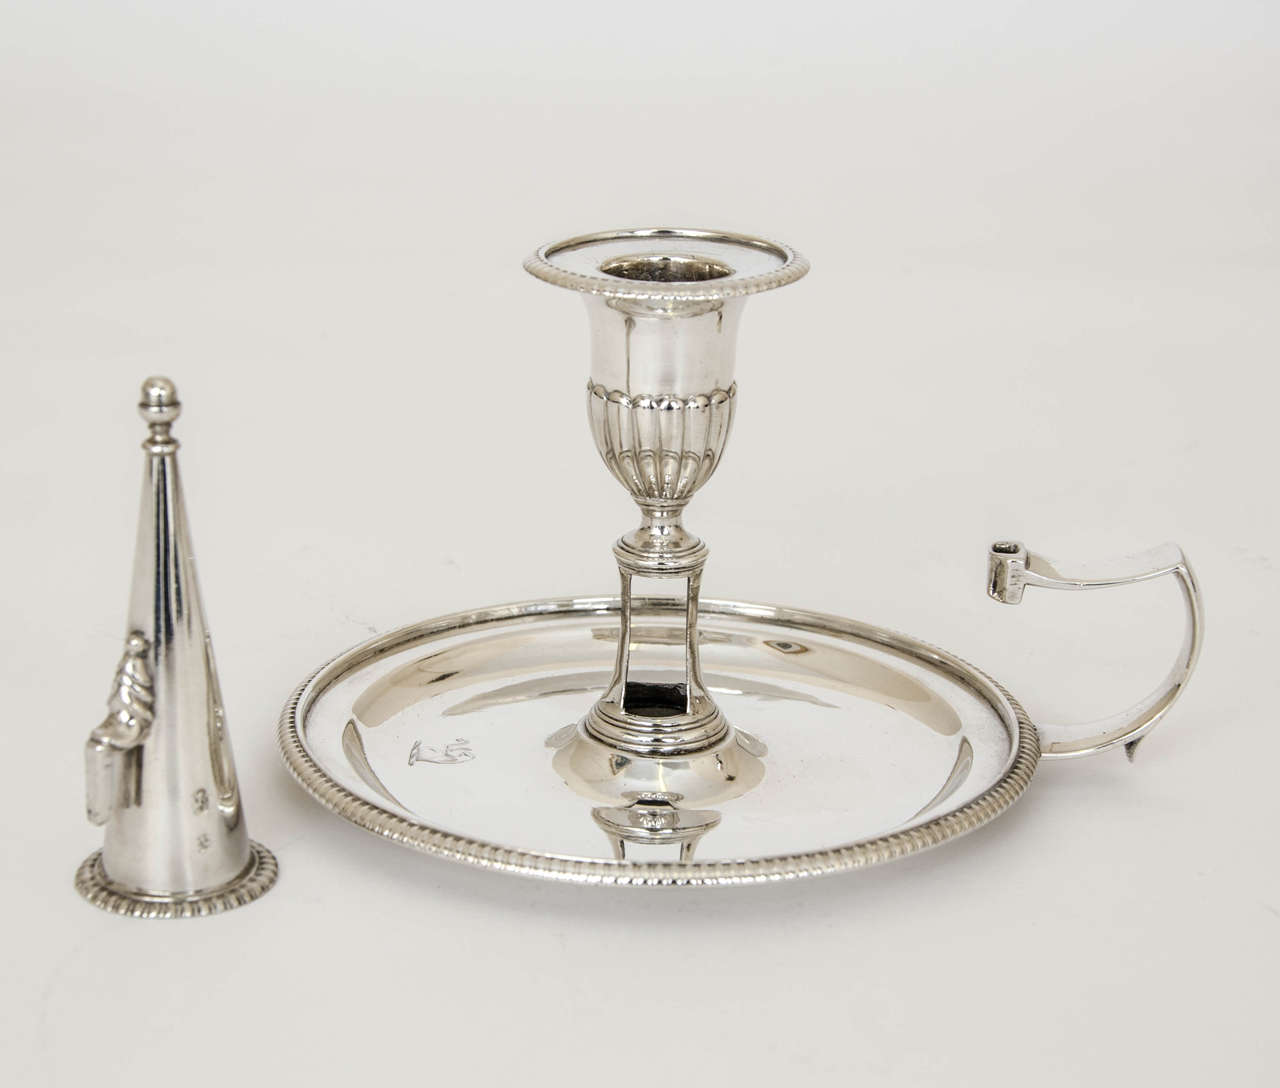 Late 18th Century Pair of George III Antique Sterling Silver by Paul Storr in 1799 For Sale